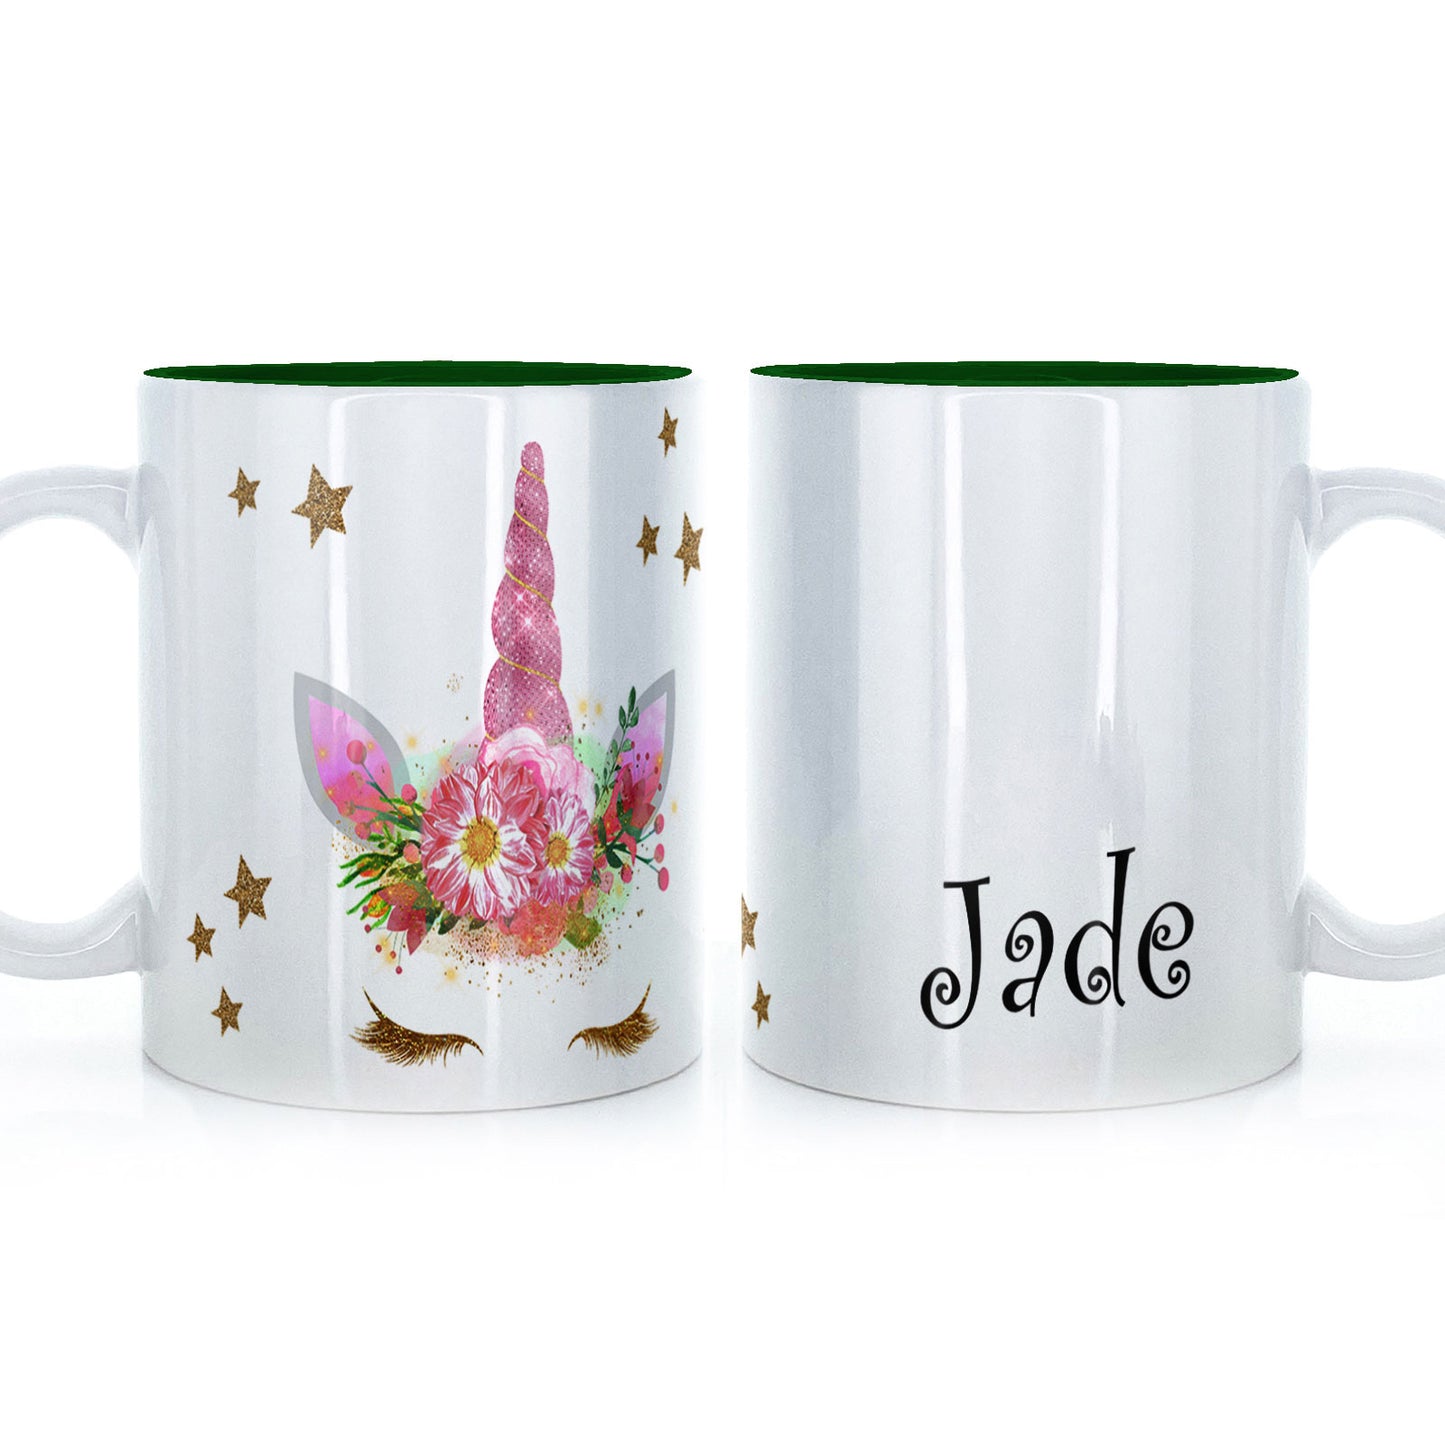 Personalised Mug with Mystical Text and Gold Eyelashes Pink Floral Unicorn